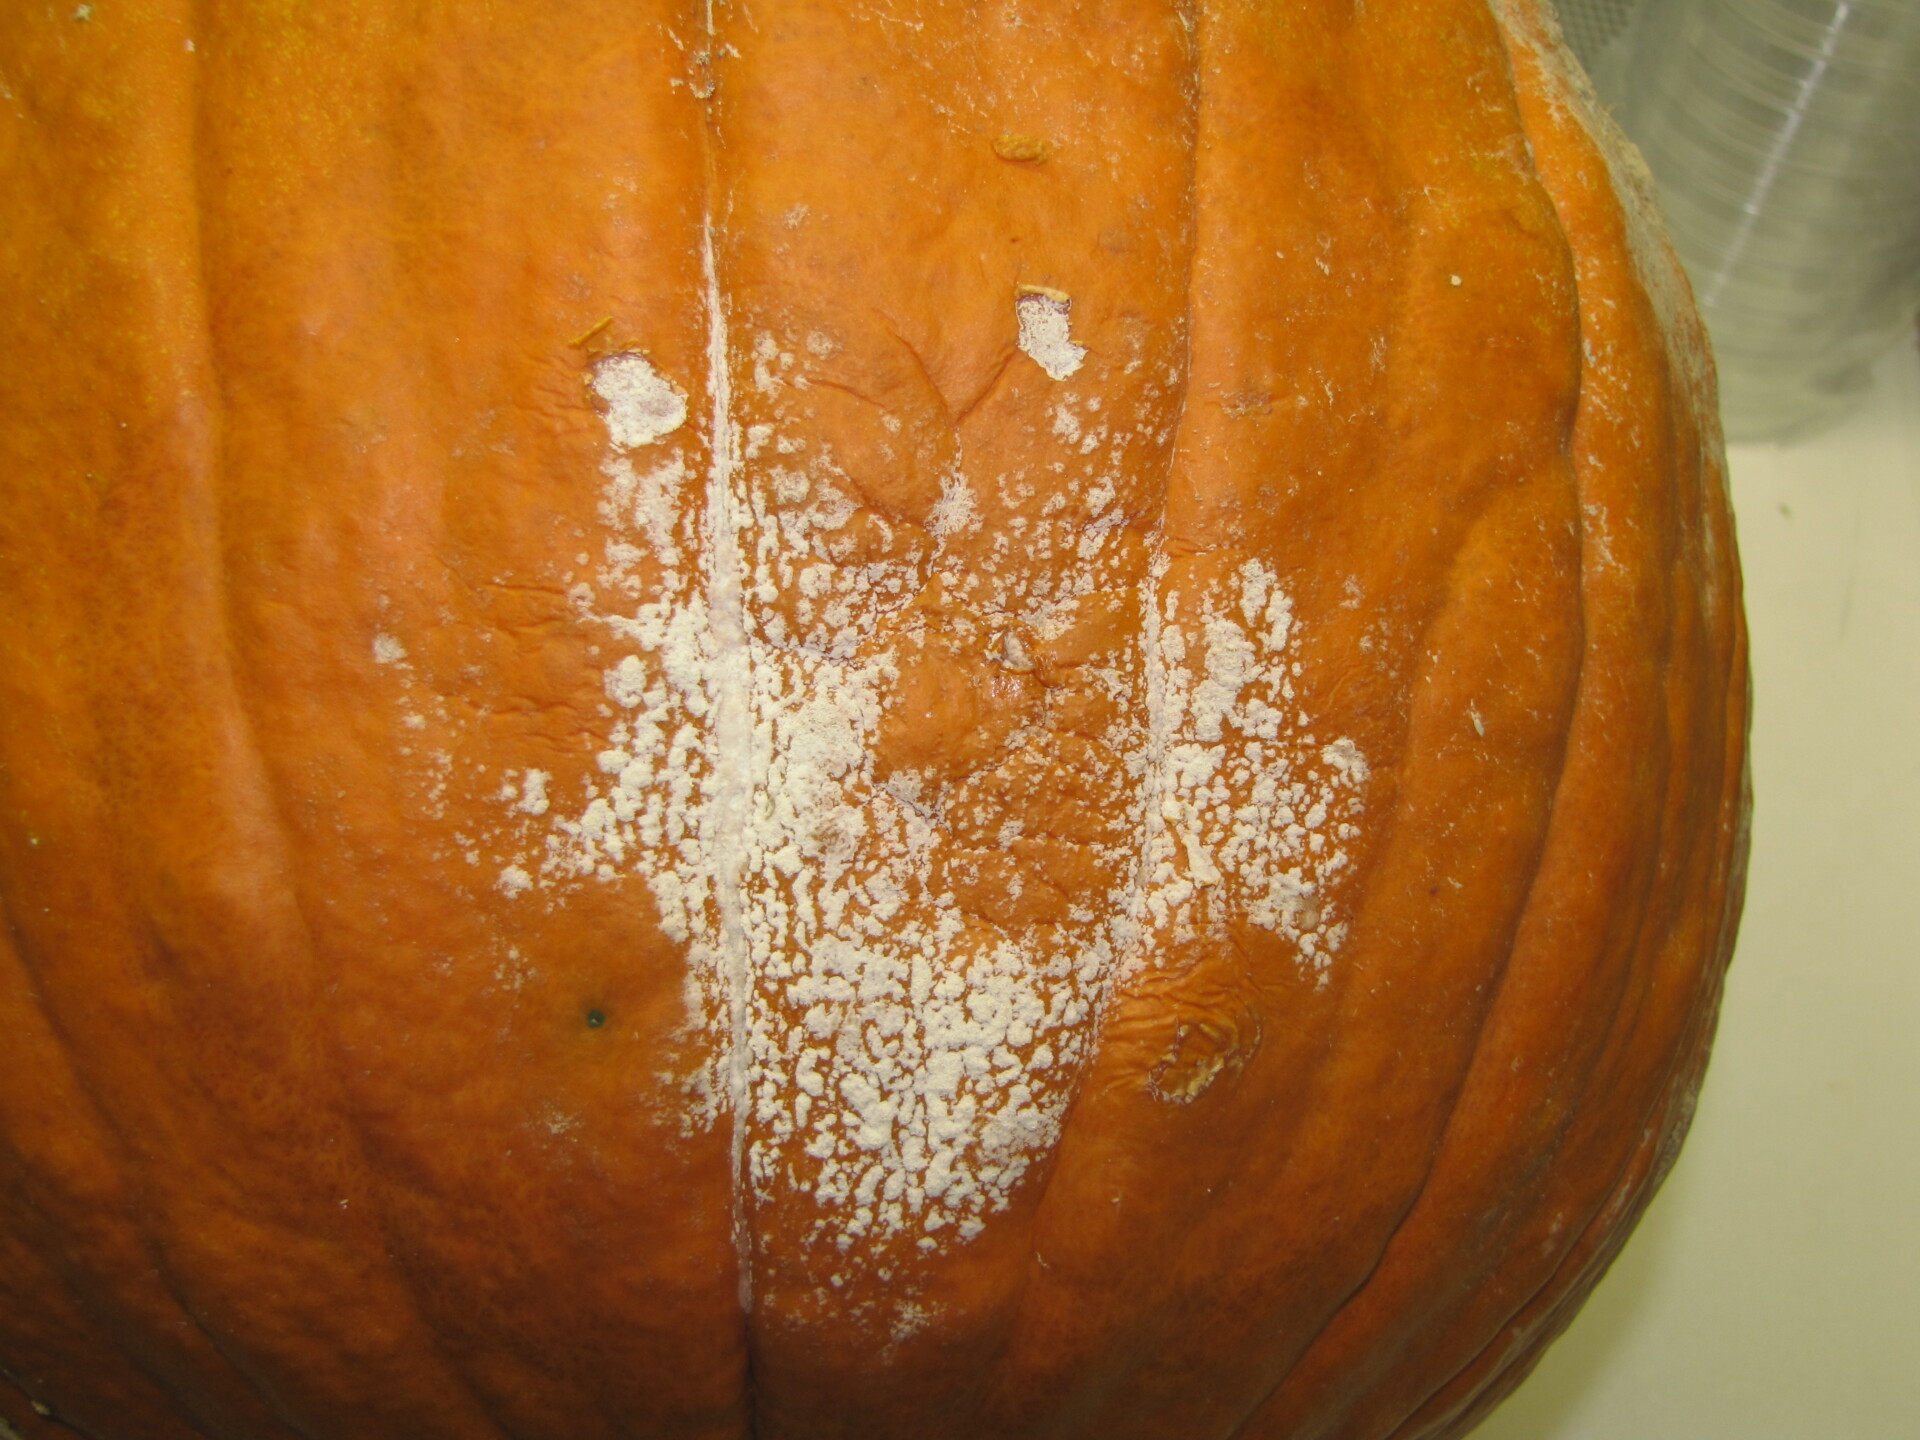 Figure 2. Phytophthora fruit rot of pumpkin.